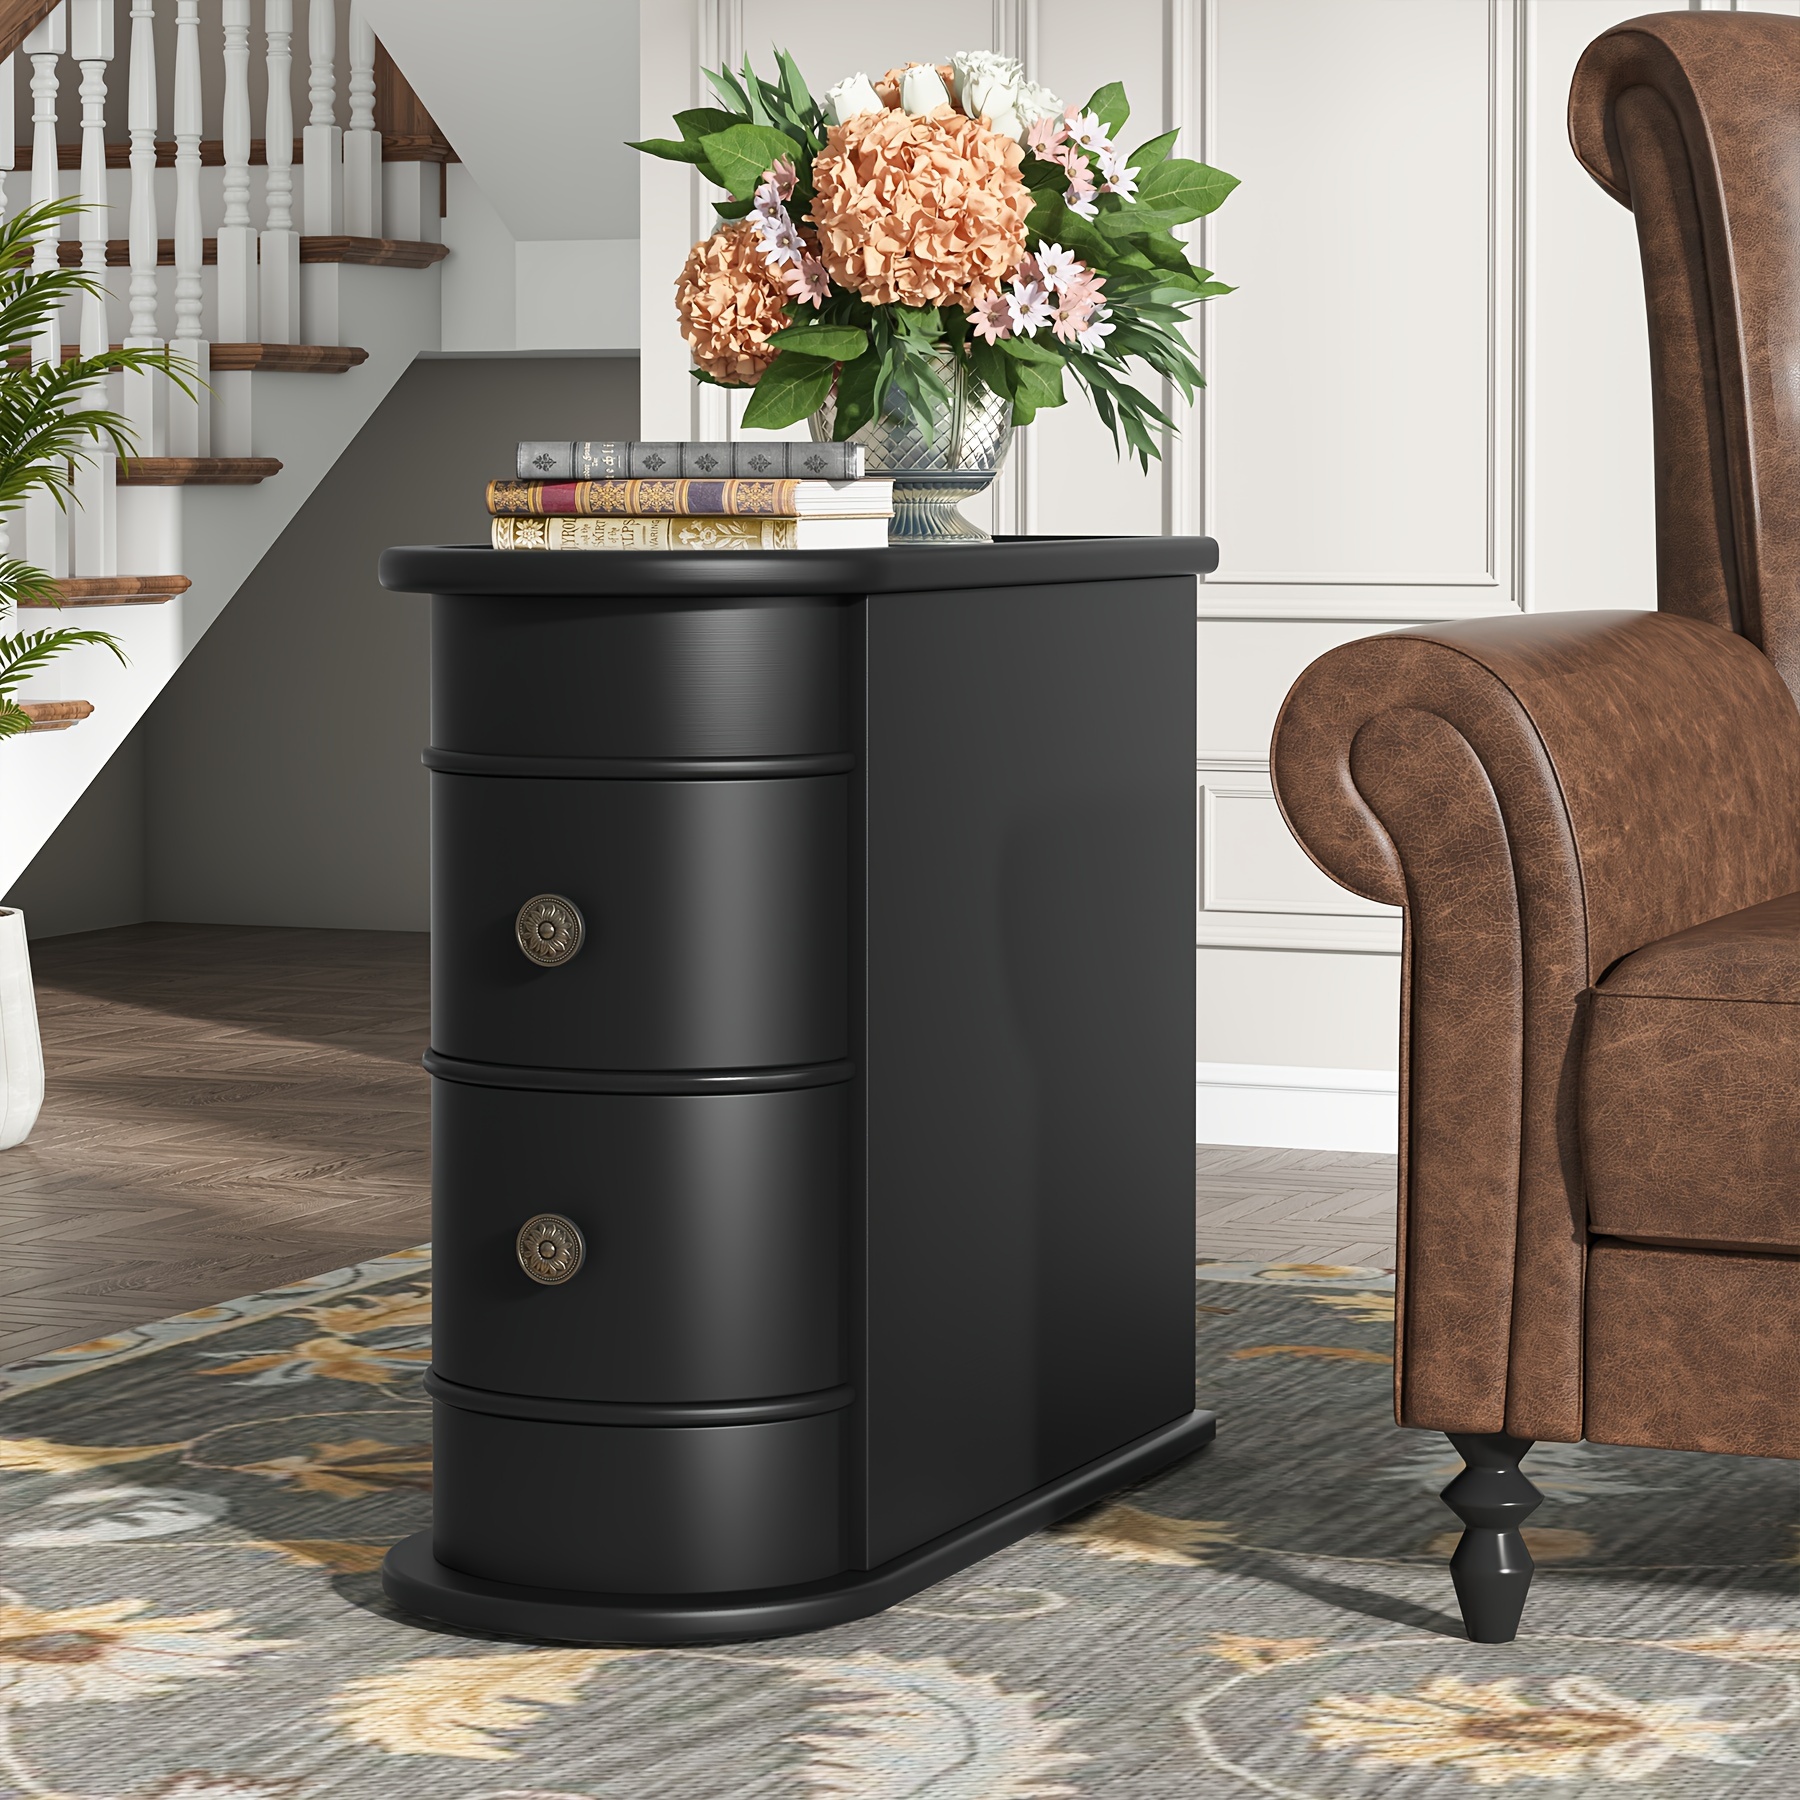 

Vintage End Table With 2 Drawers, No Assembly Required, Black Sofa Side Table With Storage, Closed Back, Nightstand Bedside Narrow Accent Table For Living Room Bedroom